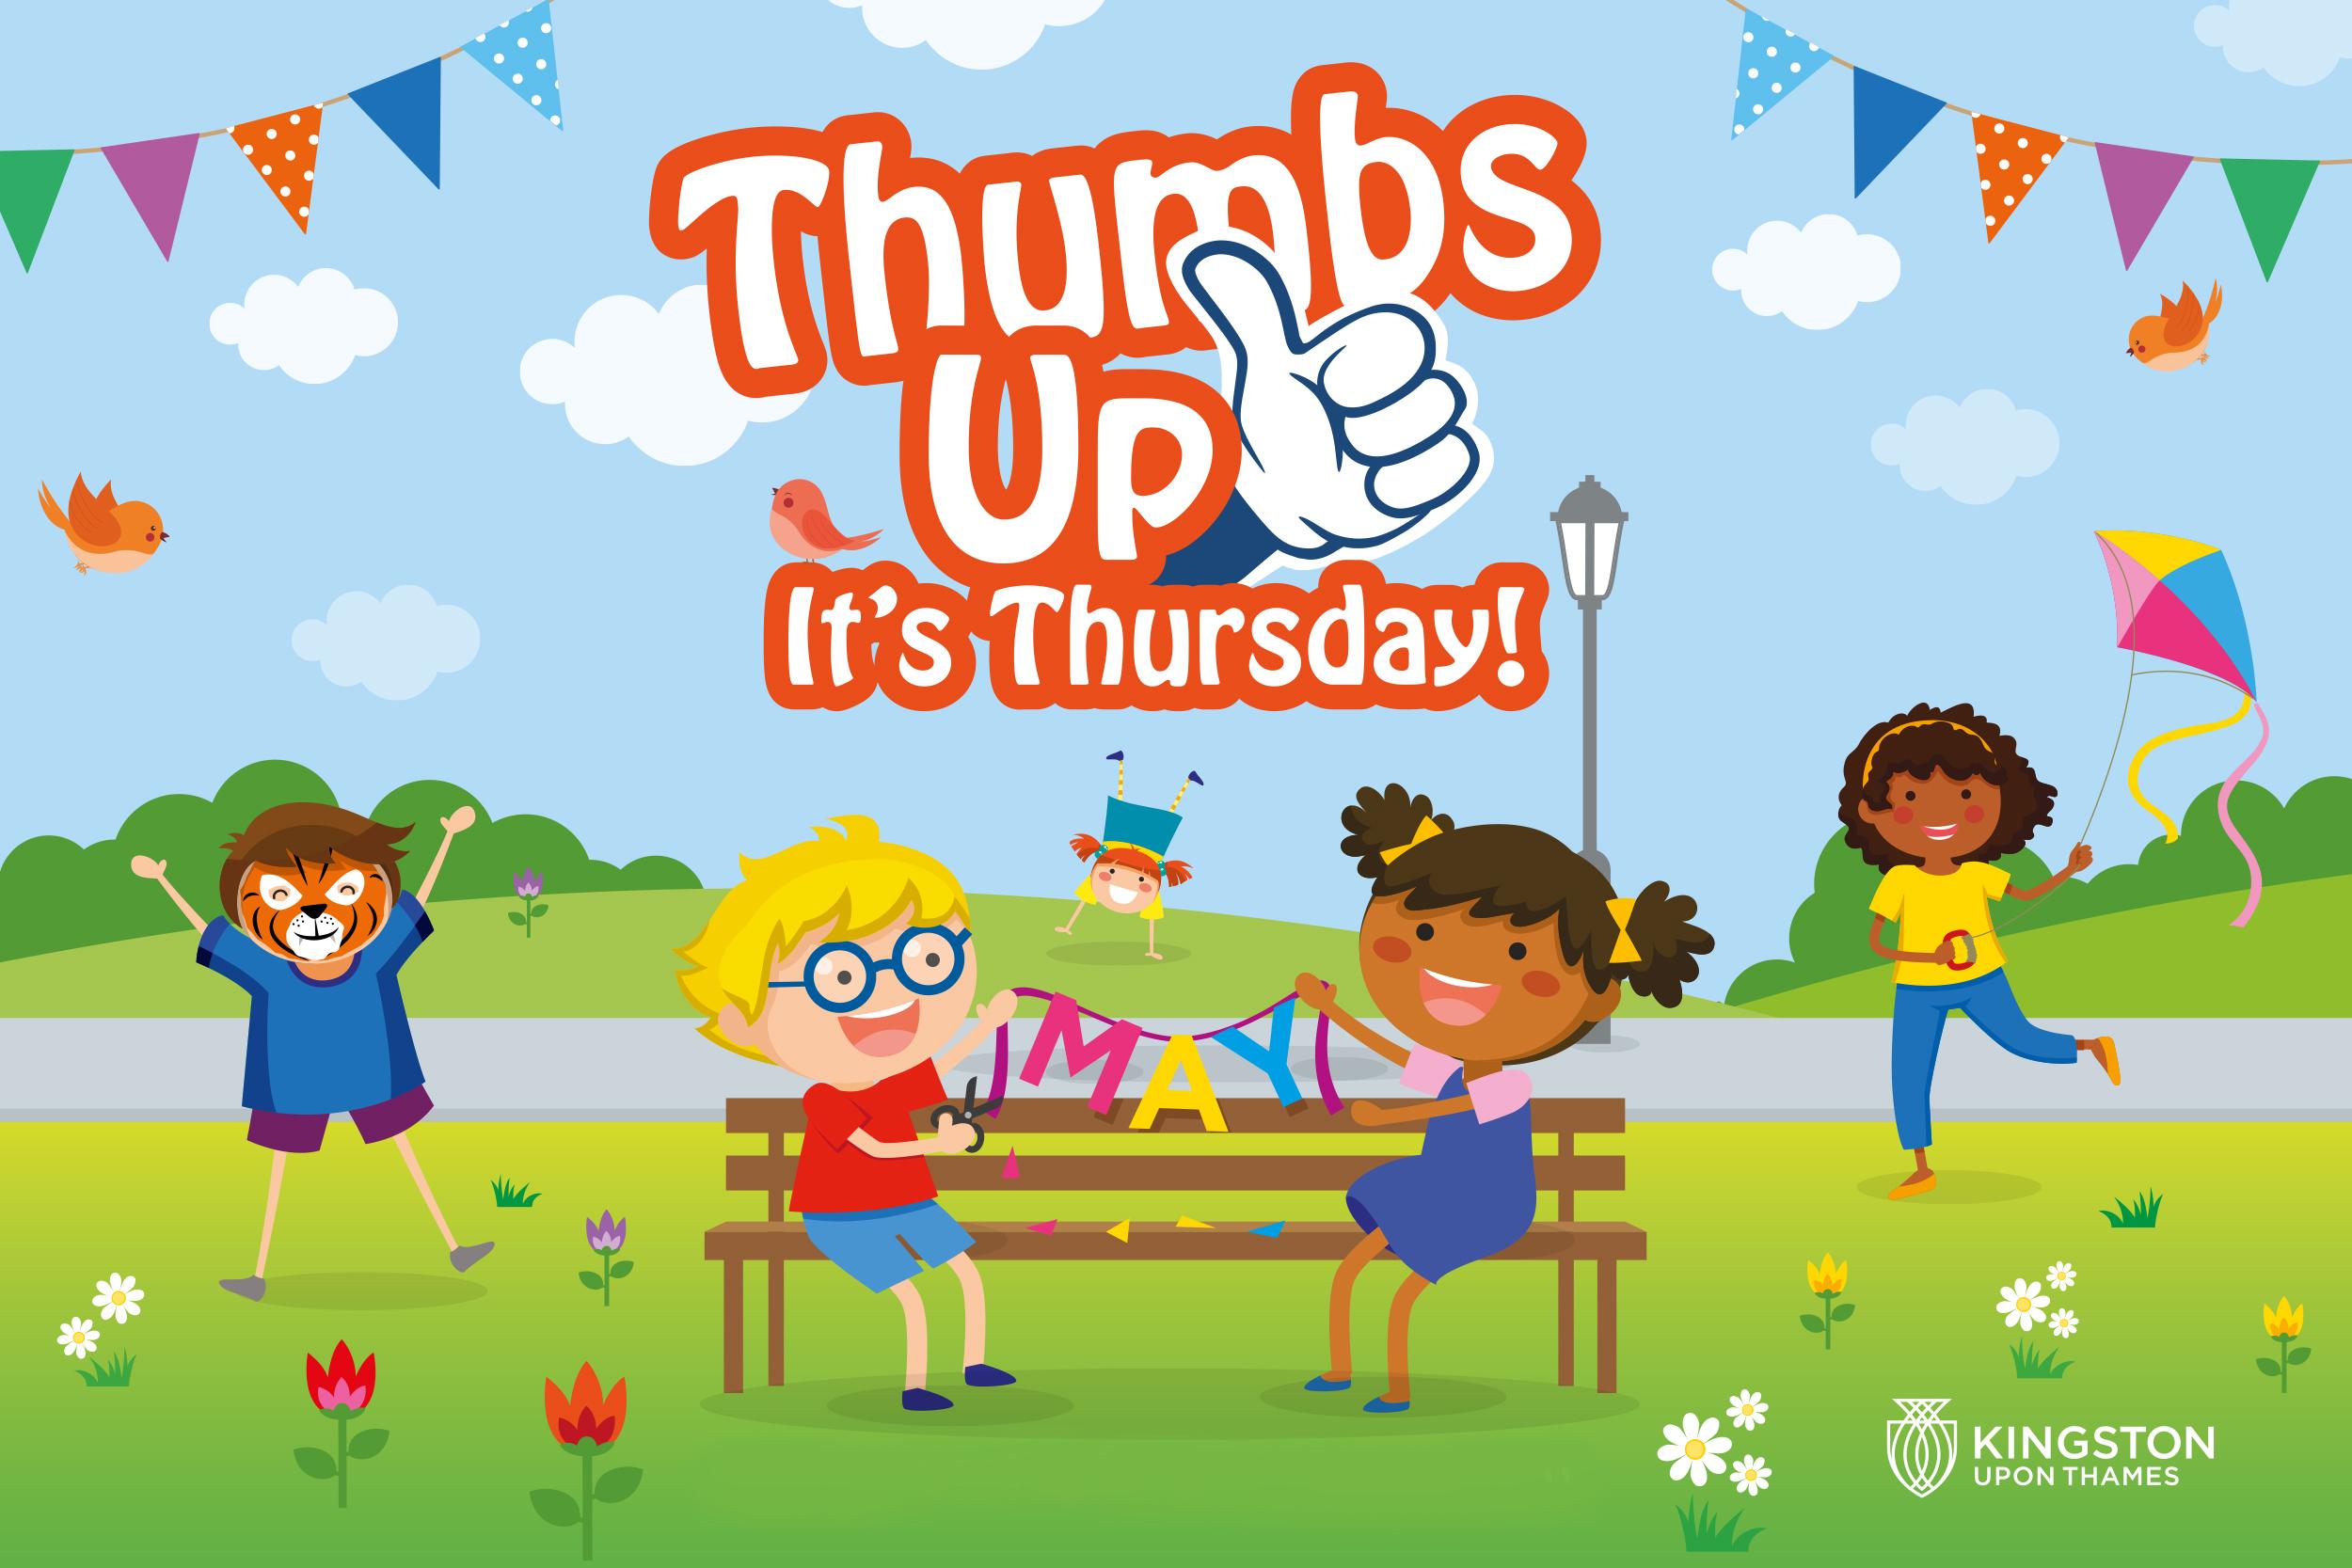 Thumbs Up It&#039;s Thursday logo above illustration of children playing outside